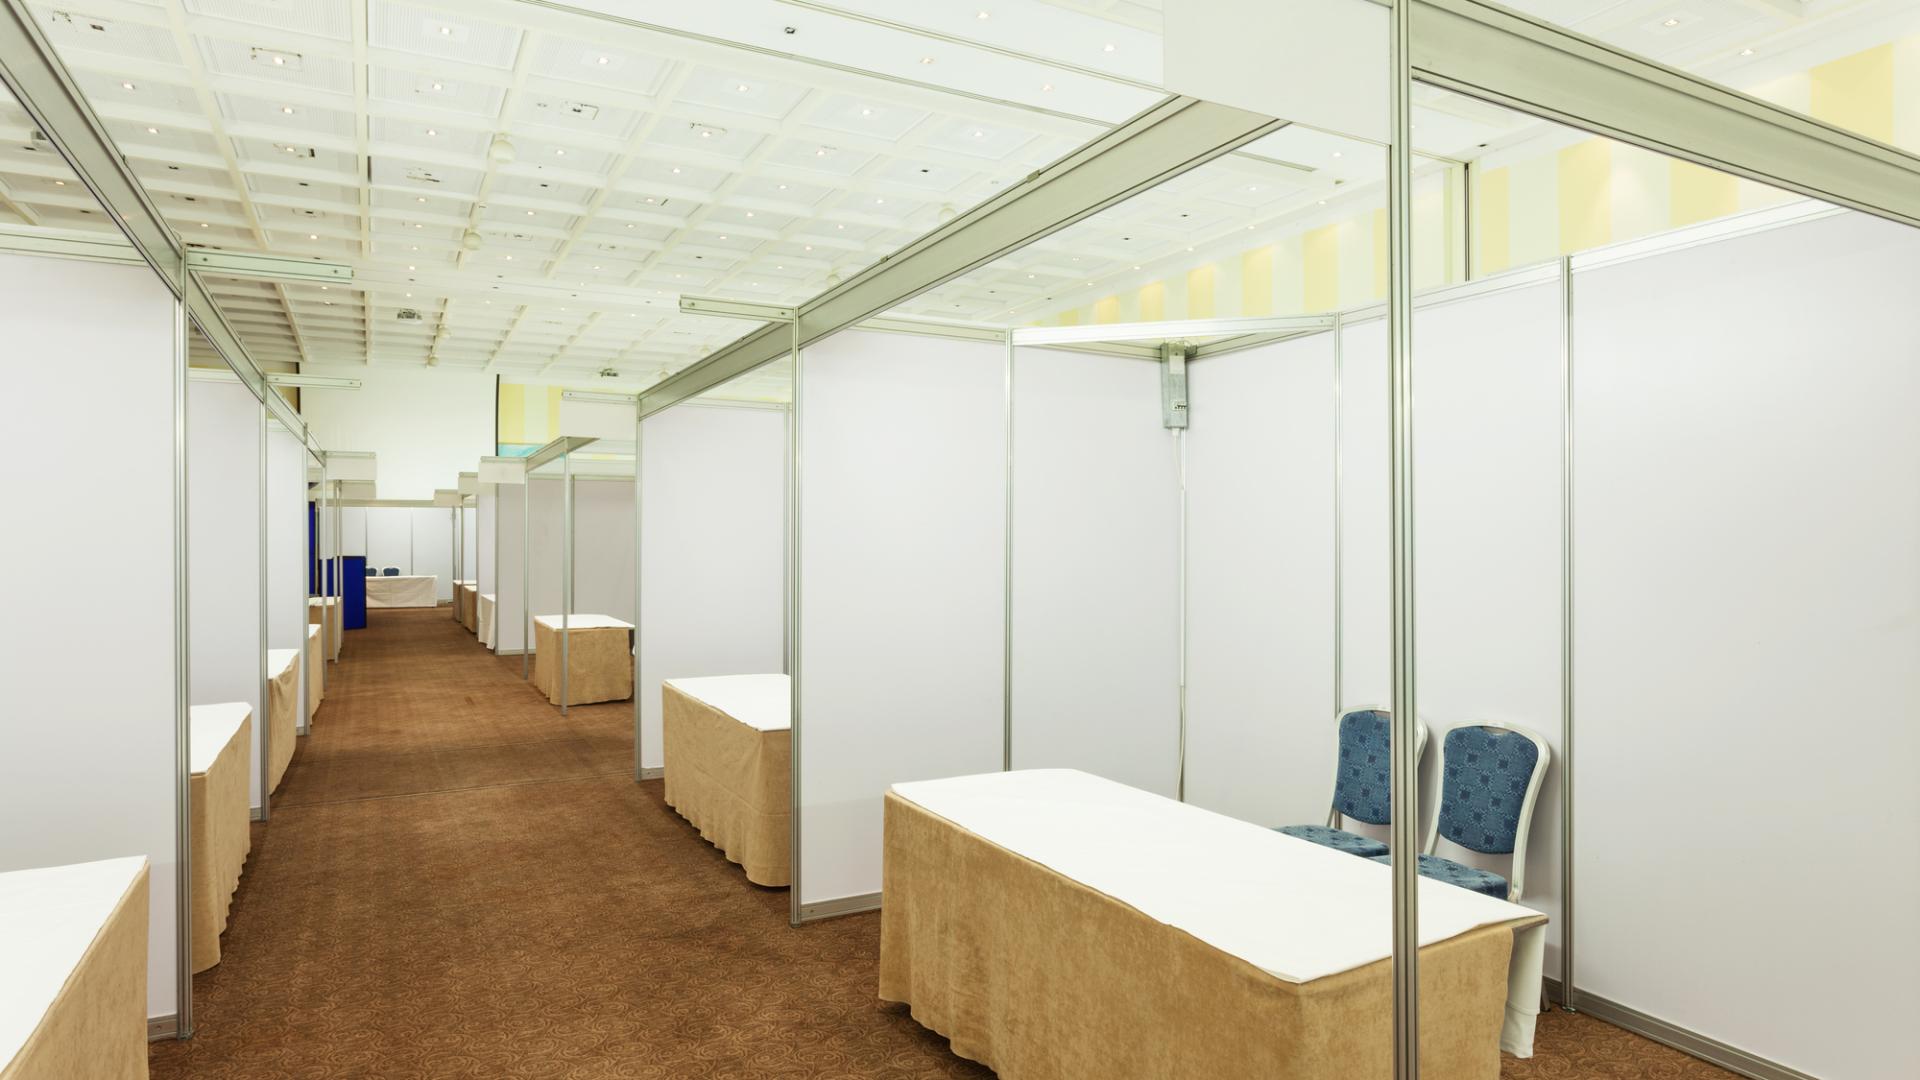 Trade Show Venues for Rent in Los Angeles, CA